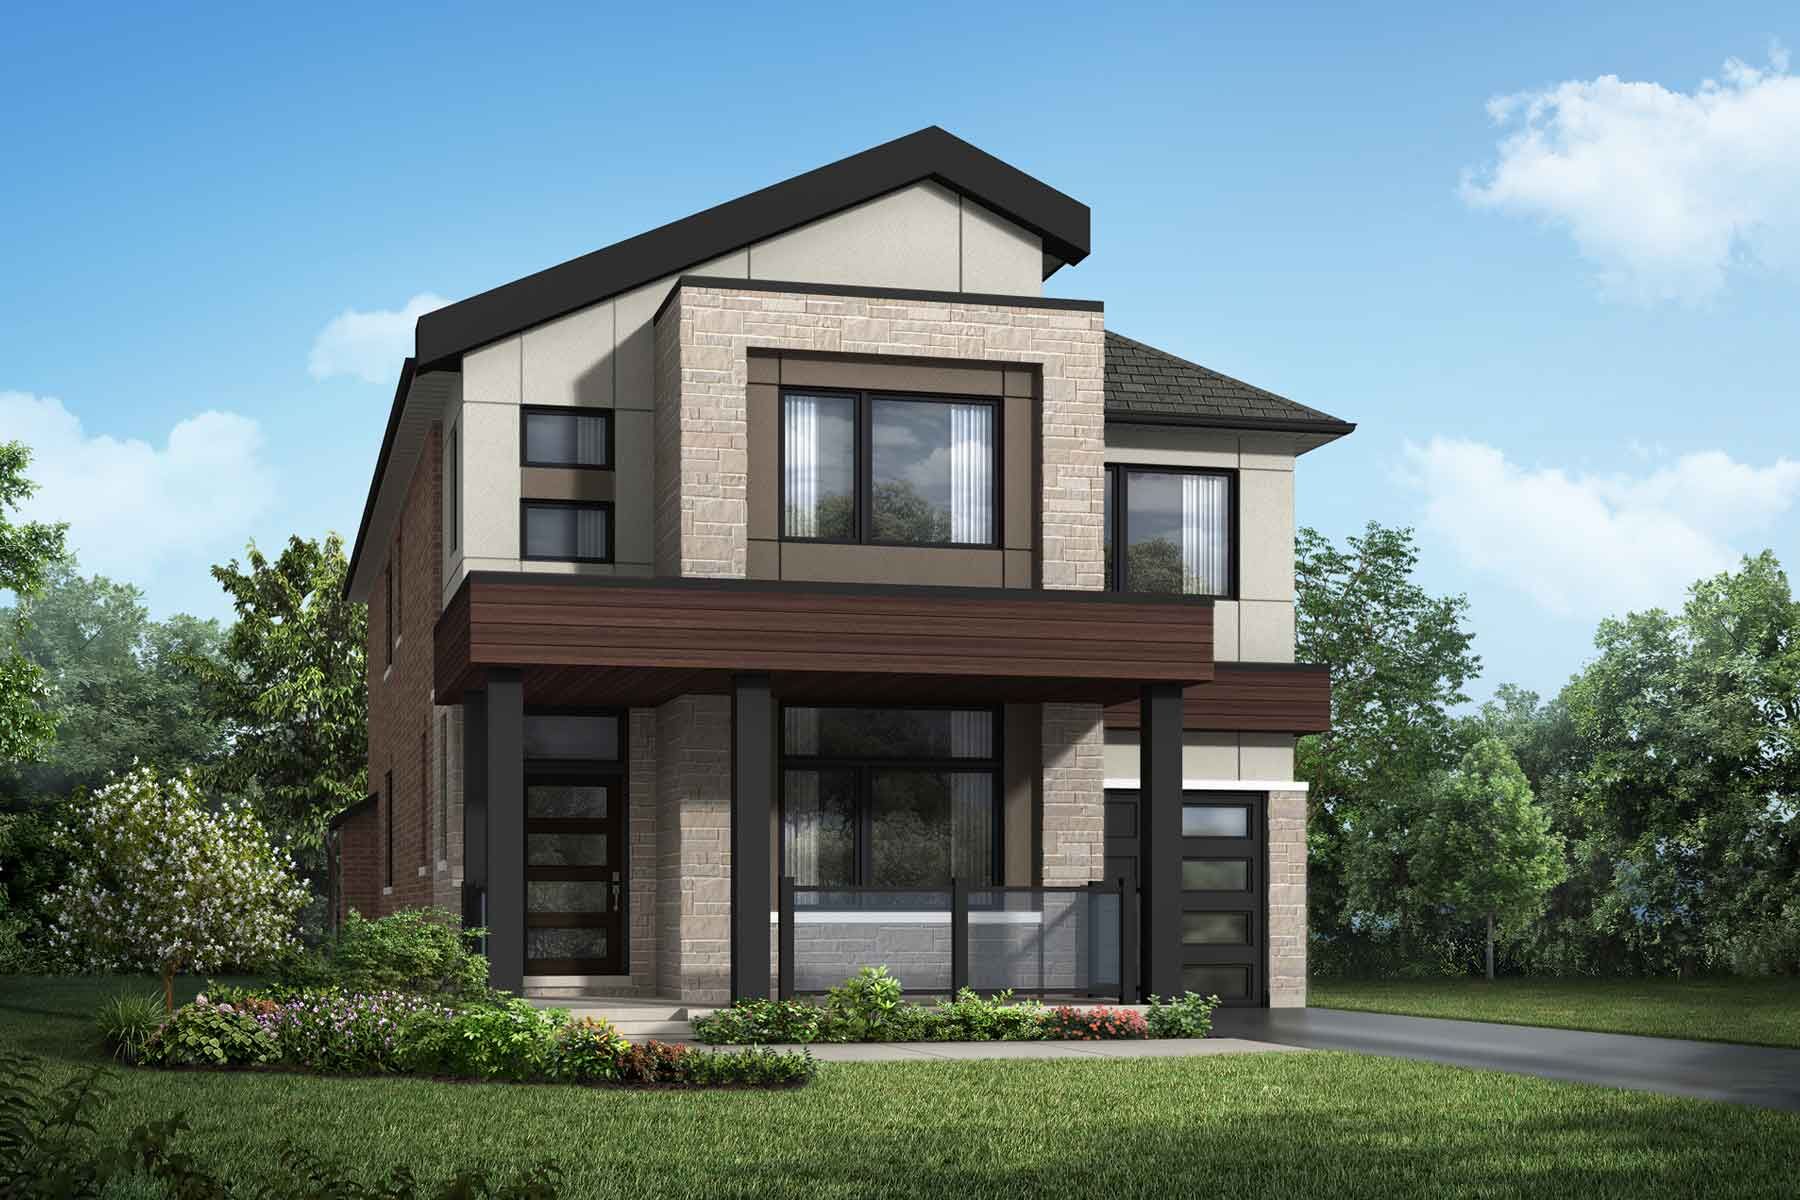 A contemporary elevation style with a single car garage and covered porch and entrance area.